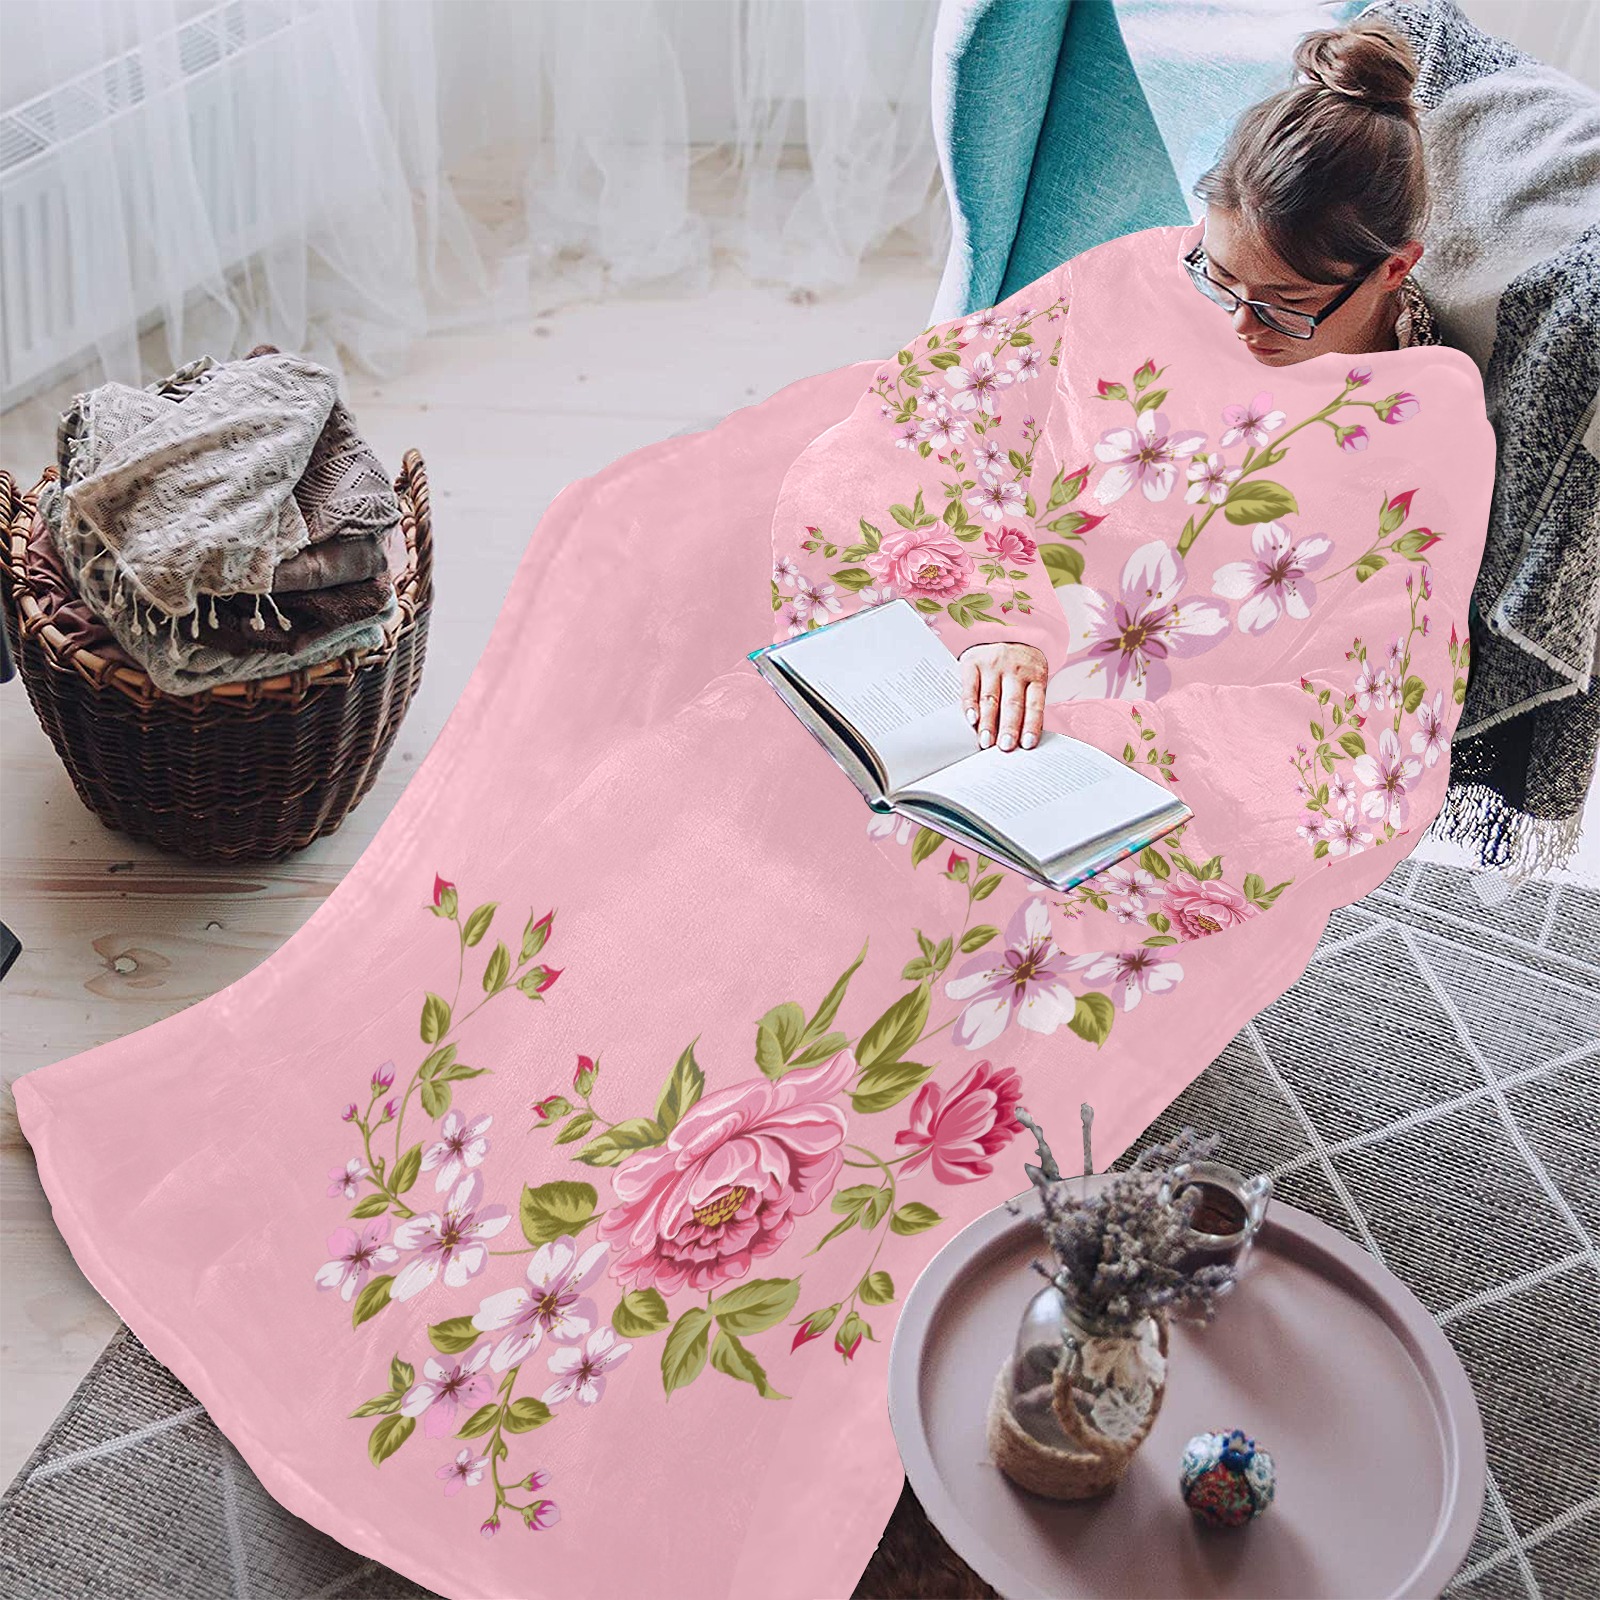 Pure Nature - Summer Of Pink Roses 1 Blanket Robe with Sleeves for Adults